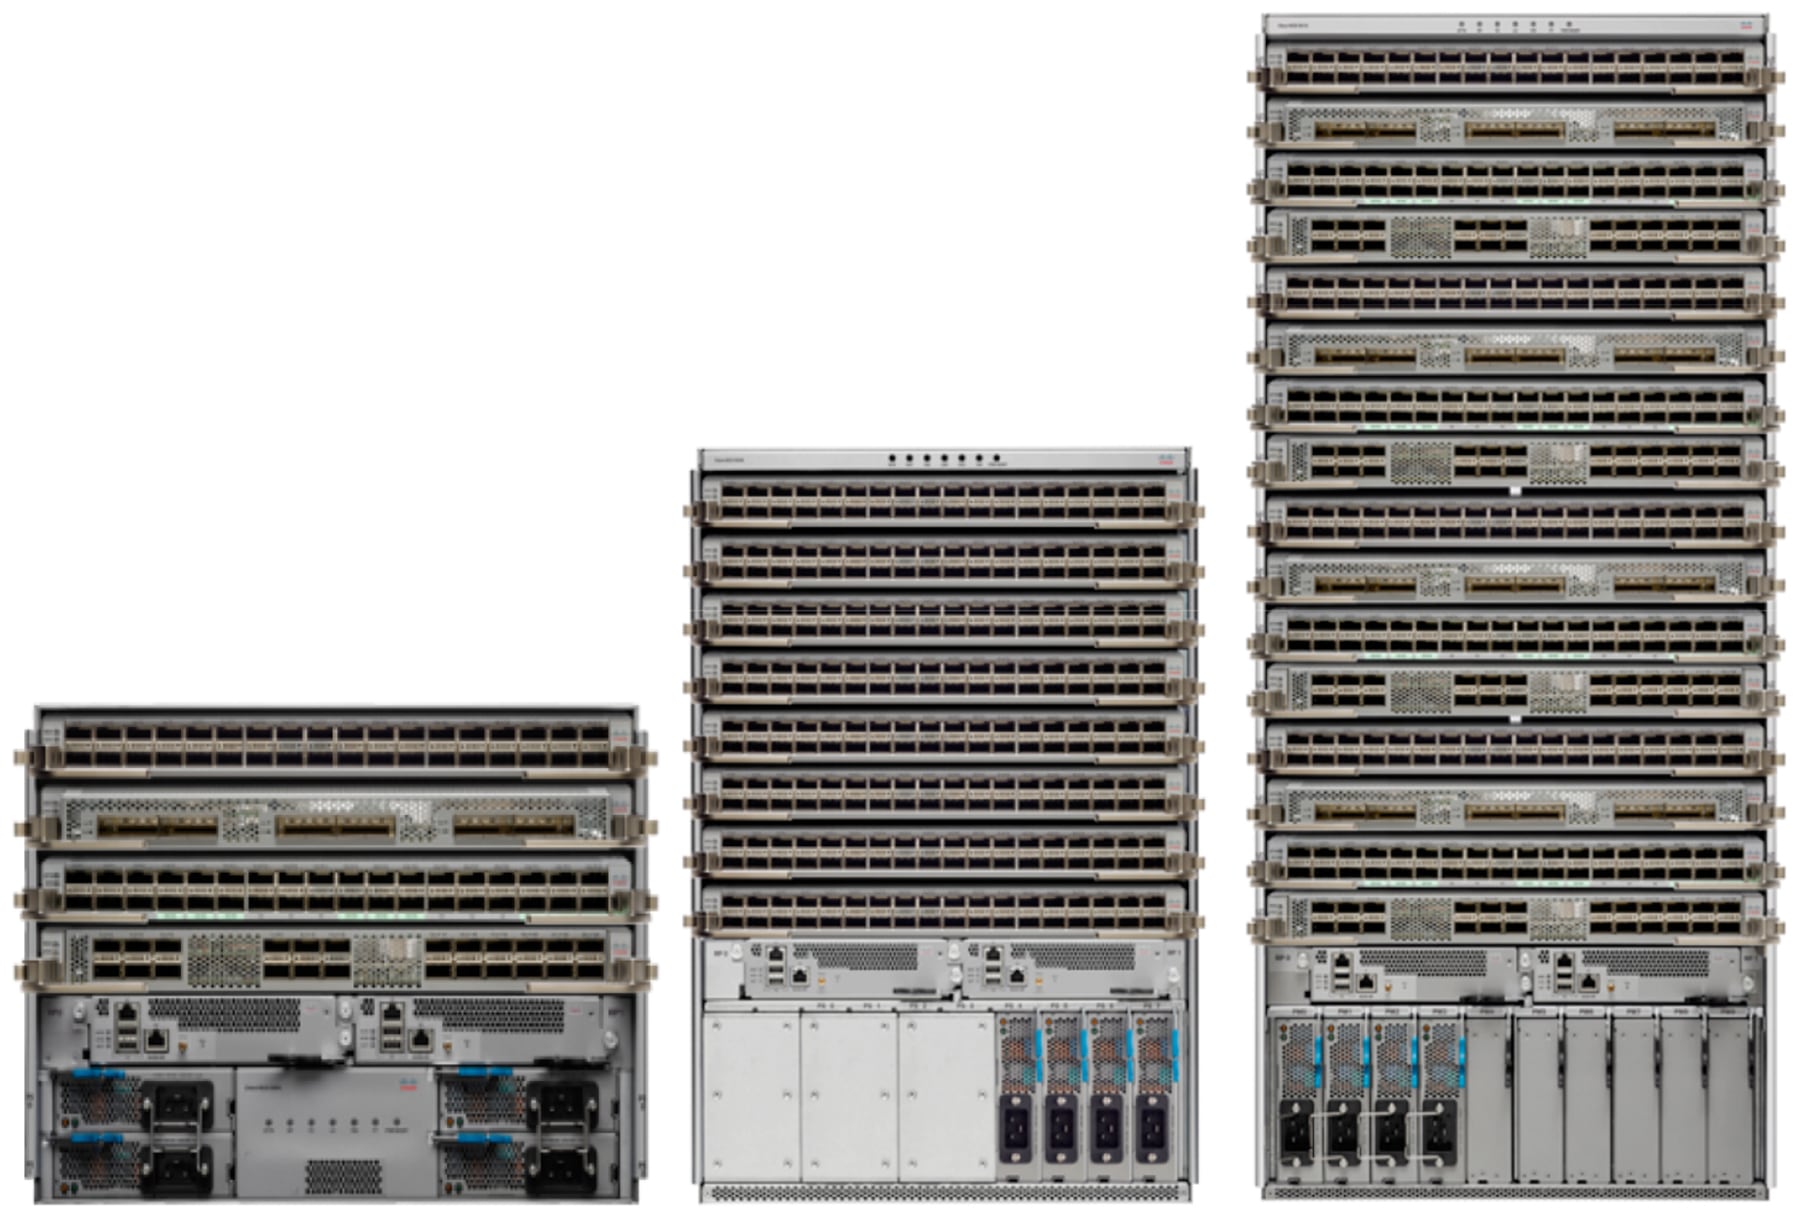 Cisco NCS 5504, Cisco NCS 5508 and NCS 5516 chassis